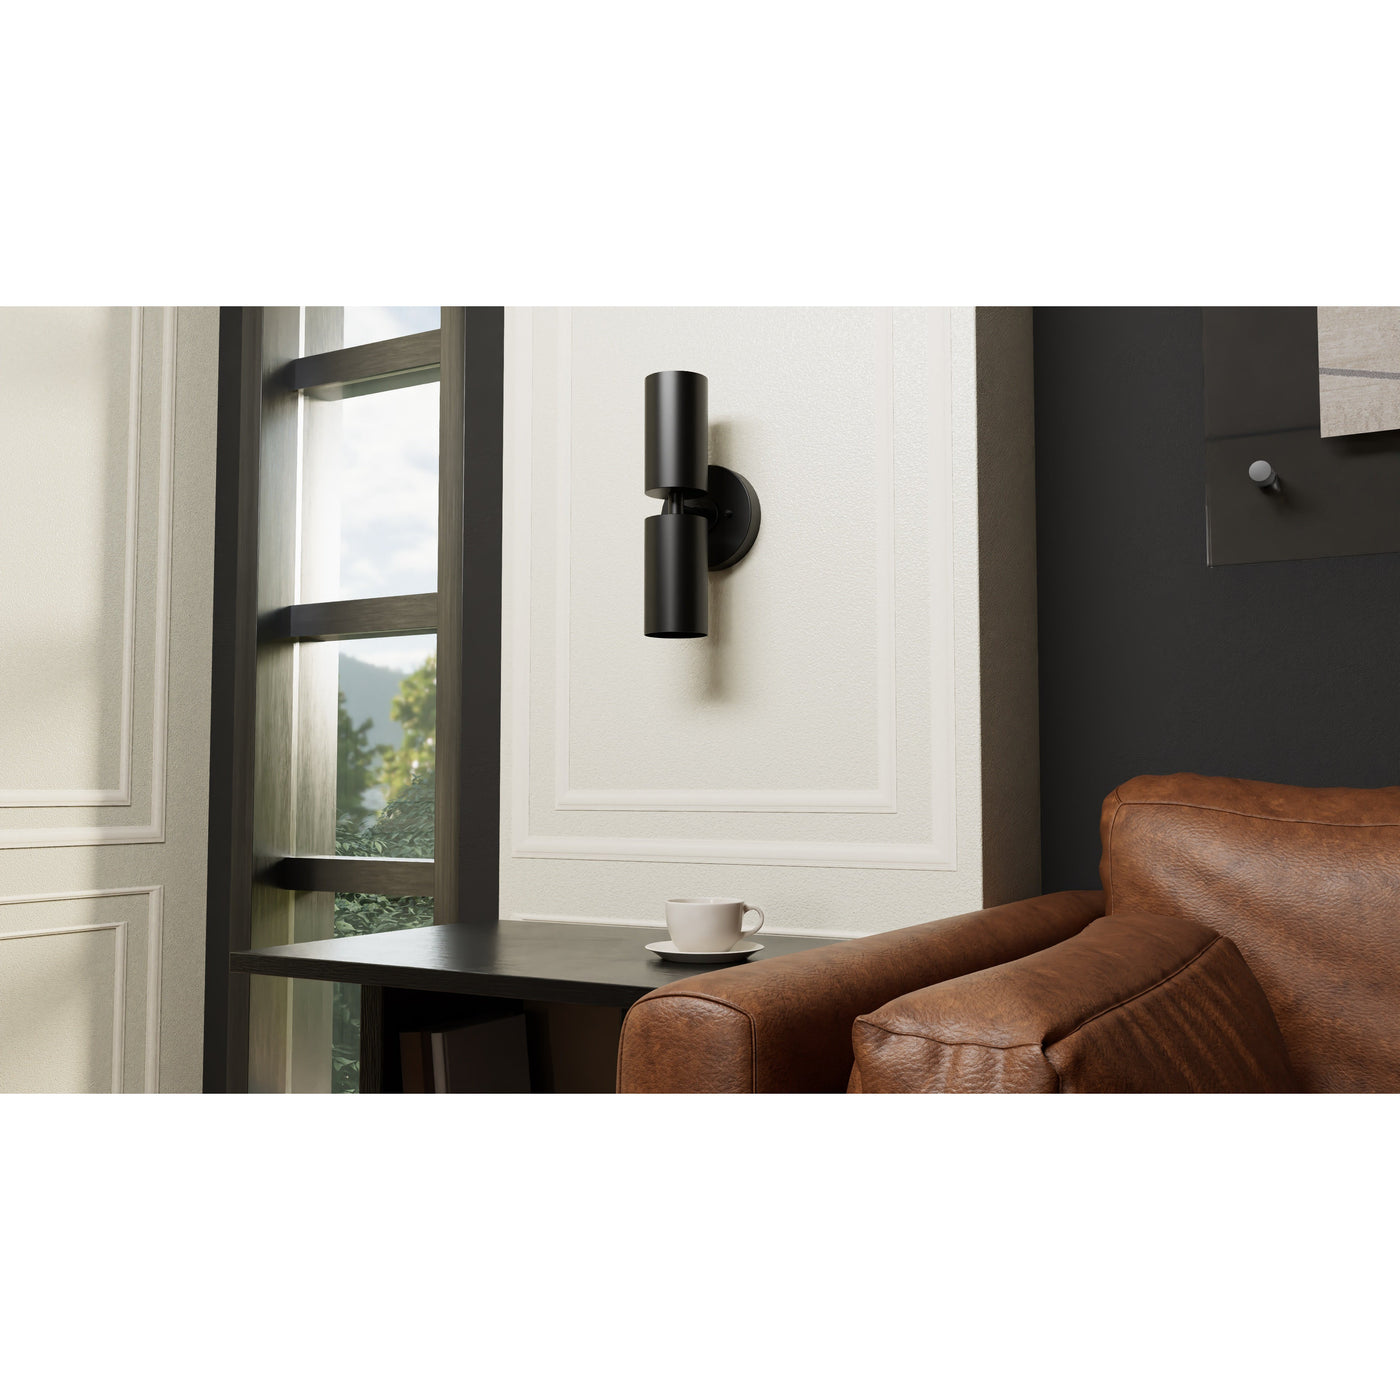 Holley - Two Light Sconce